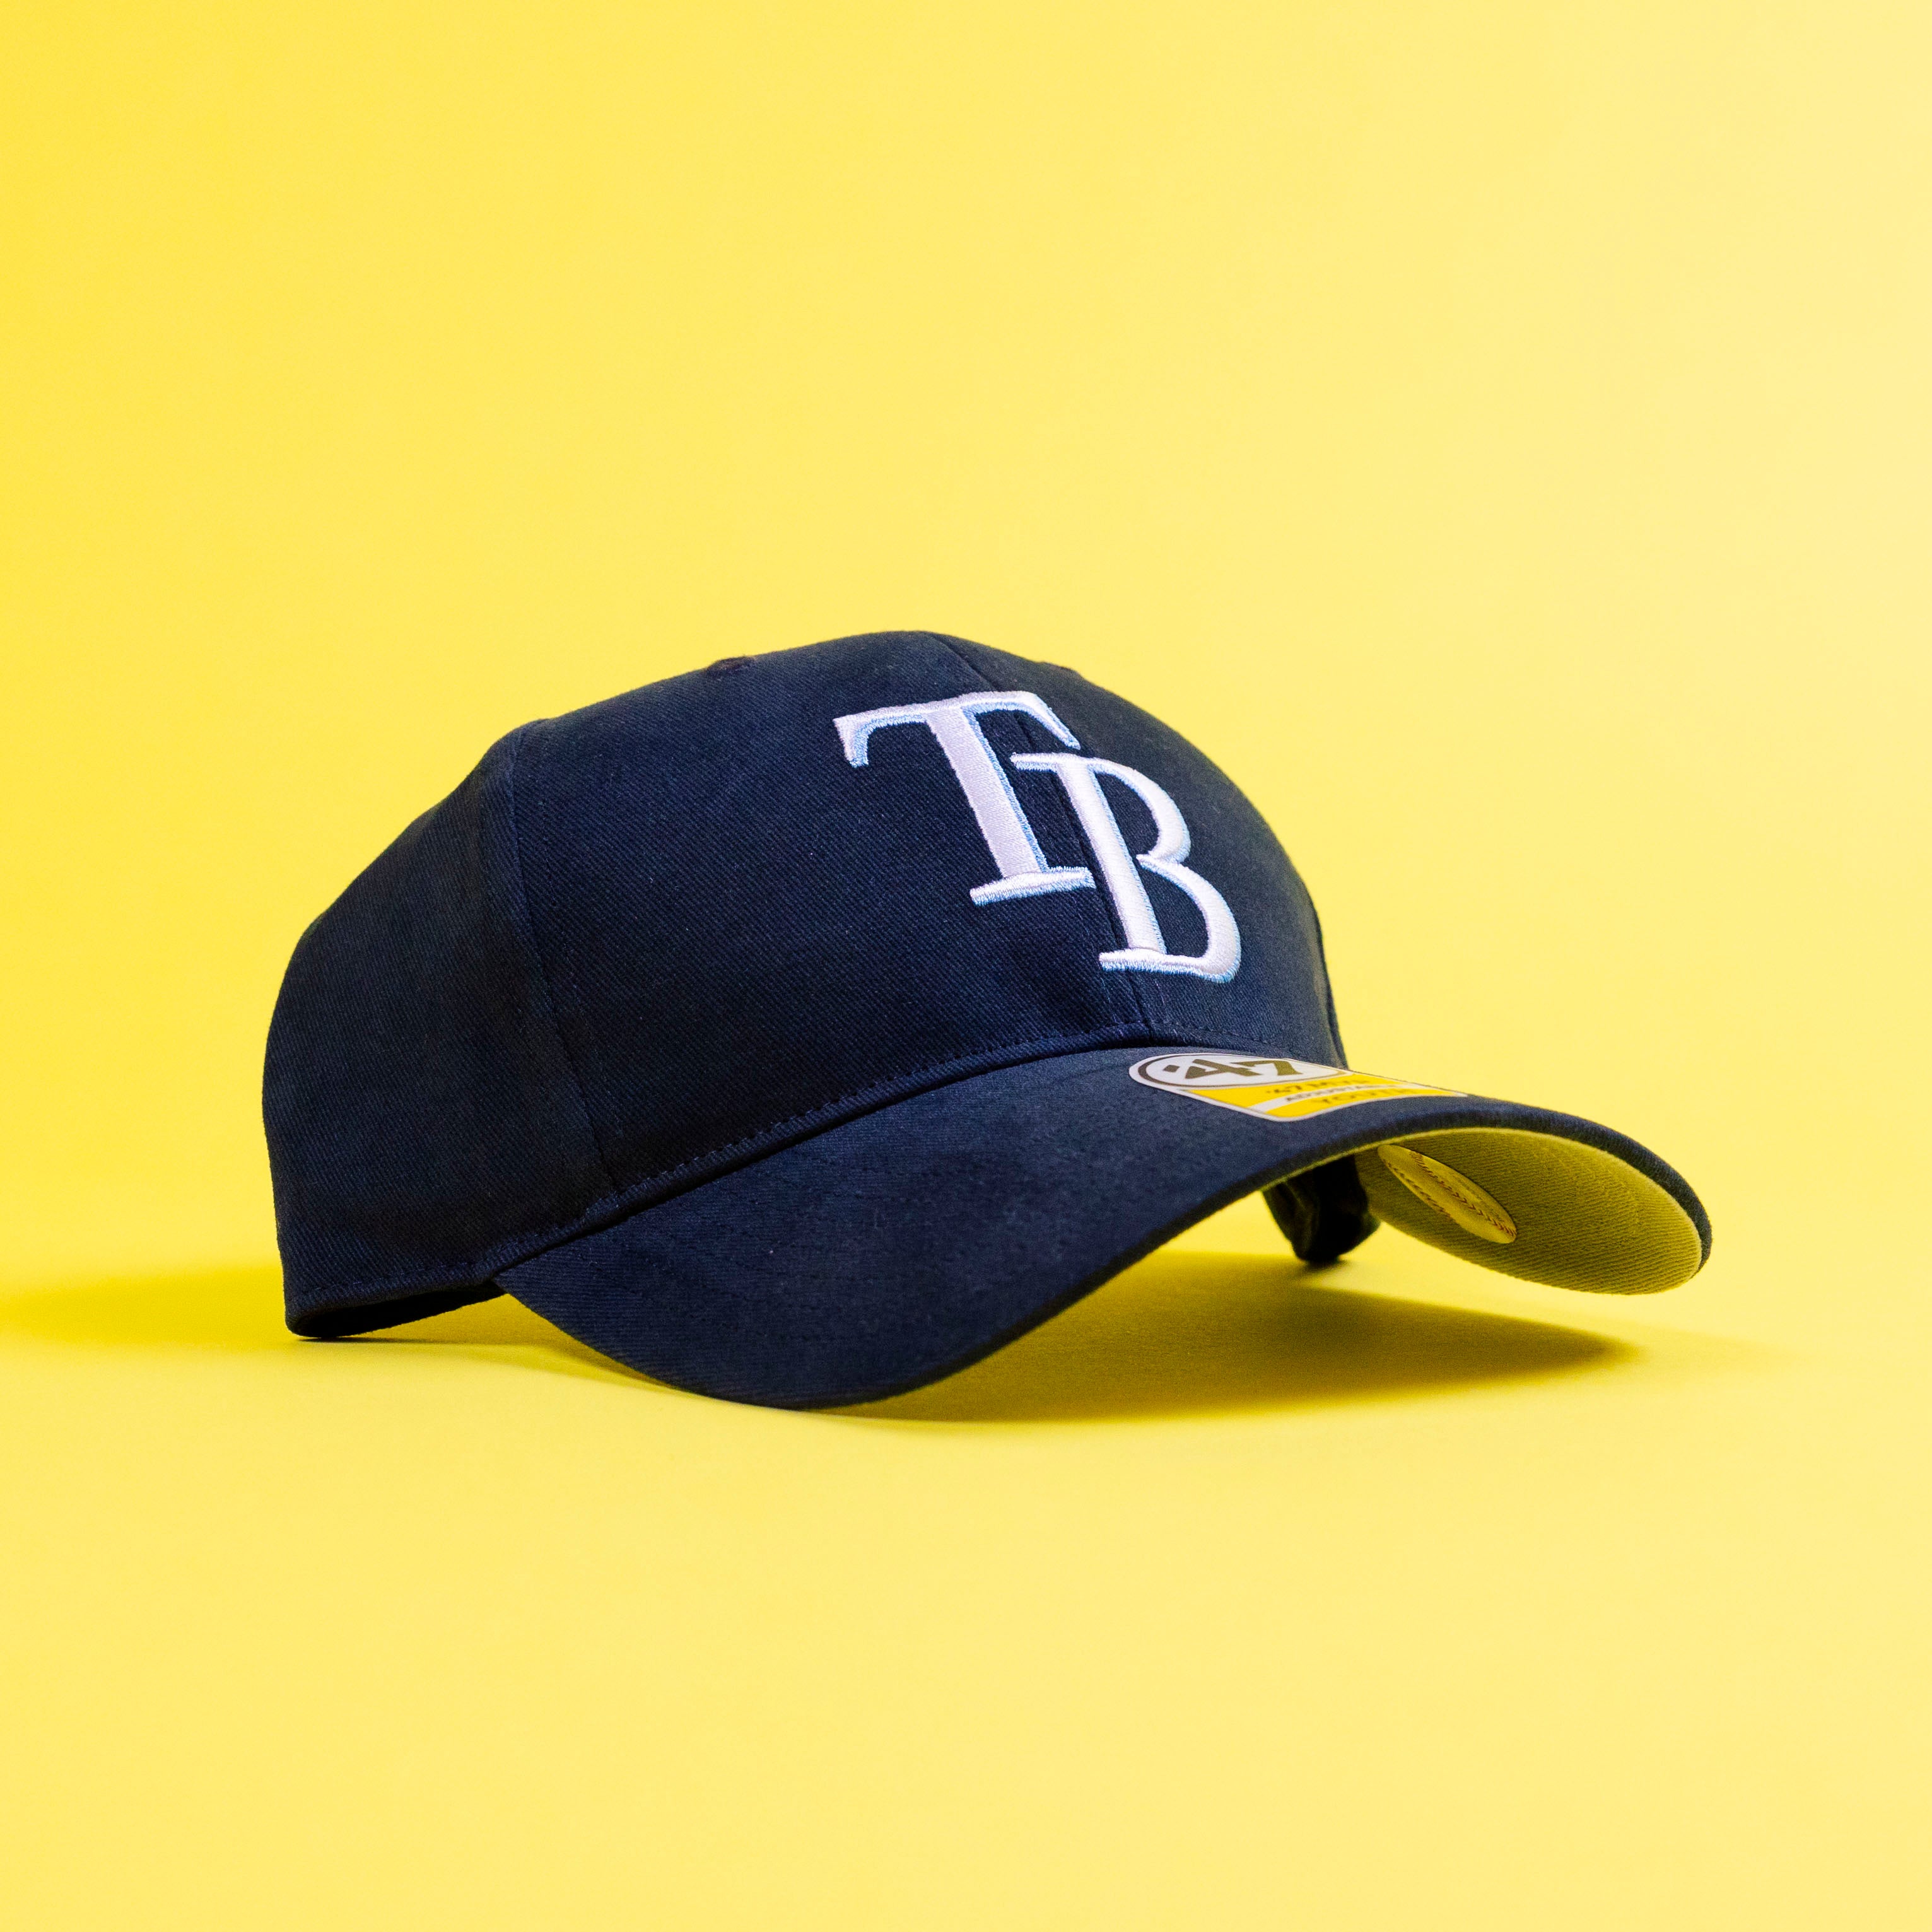 Tampa Bay Rays '47 Clean Up Adjustable Hat - Navy